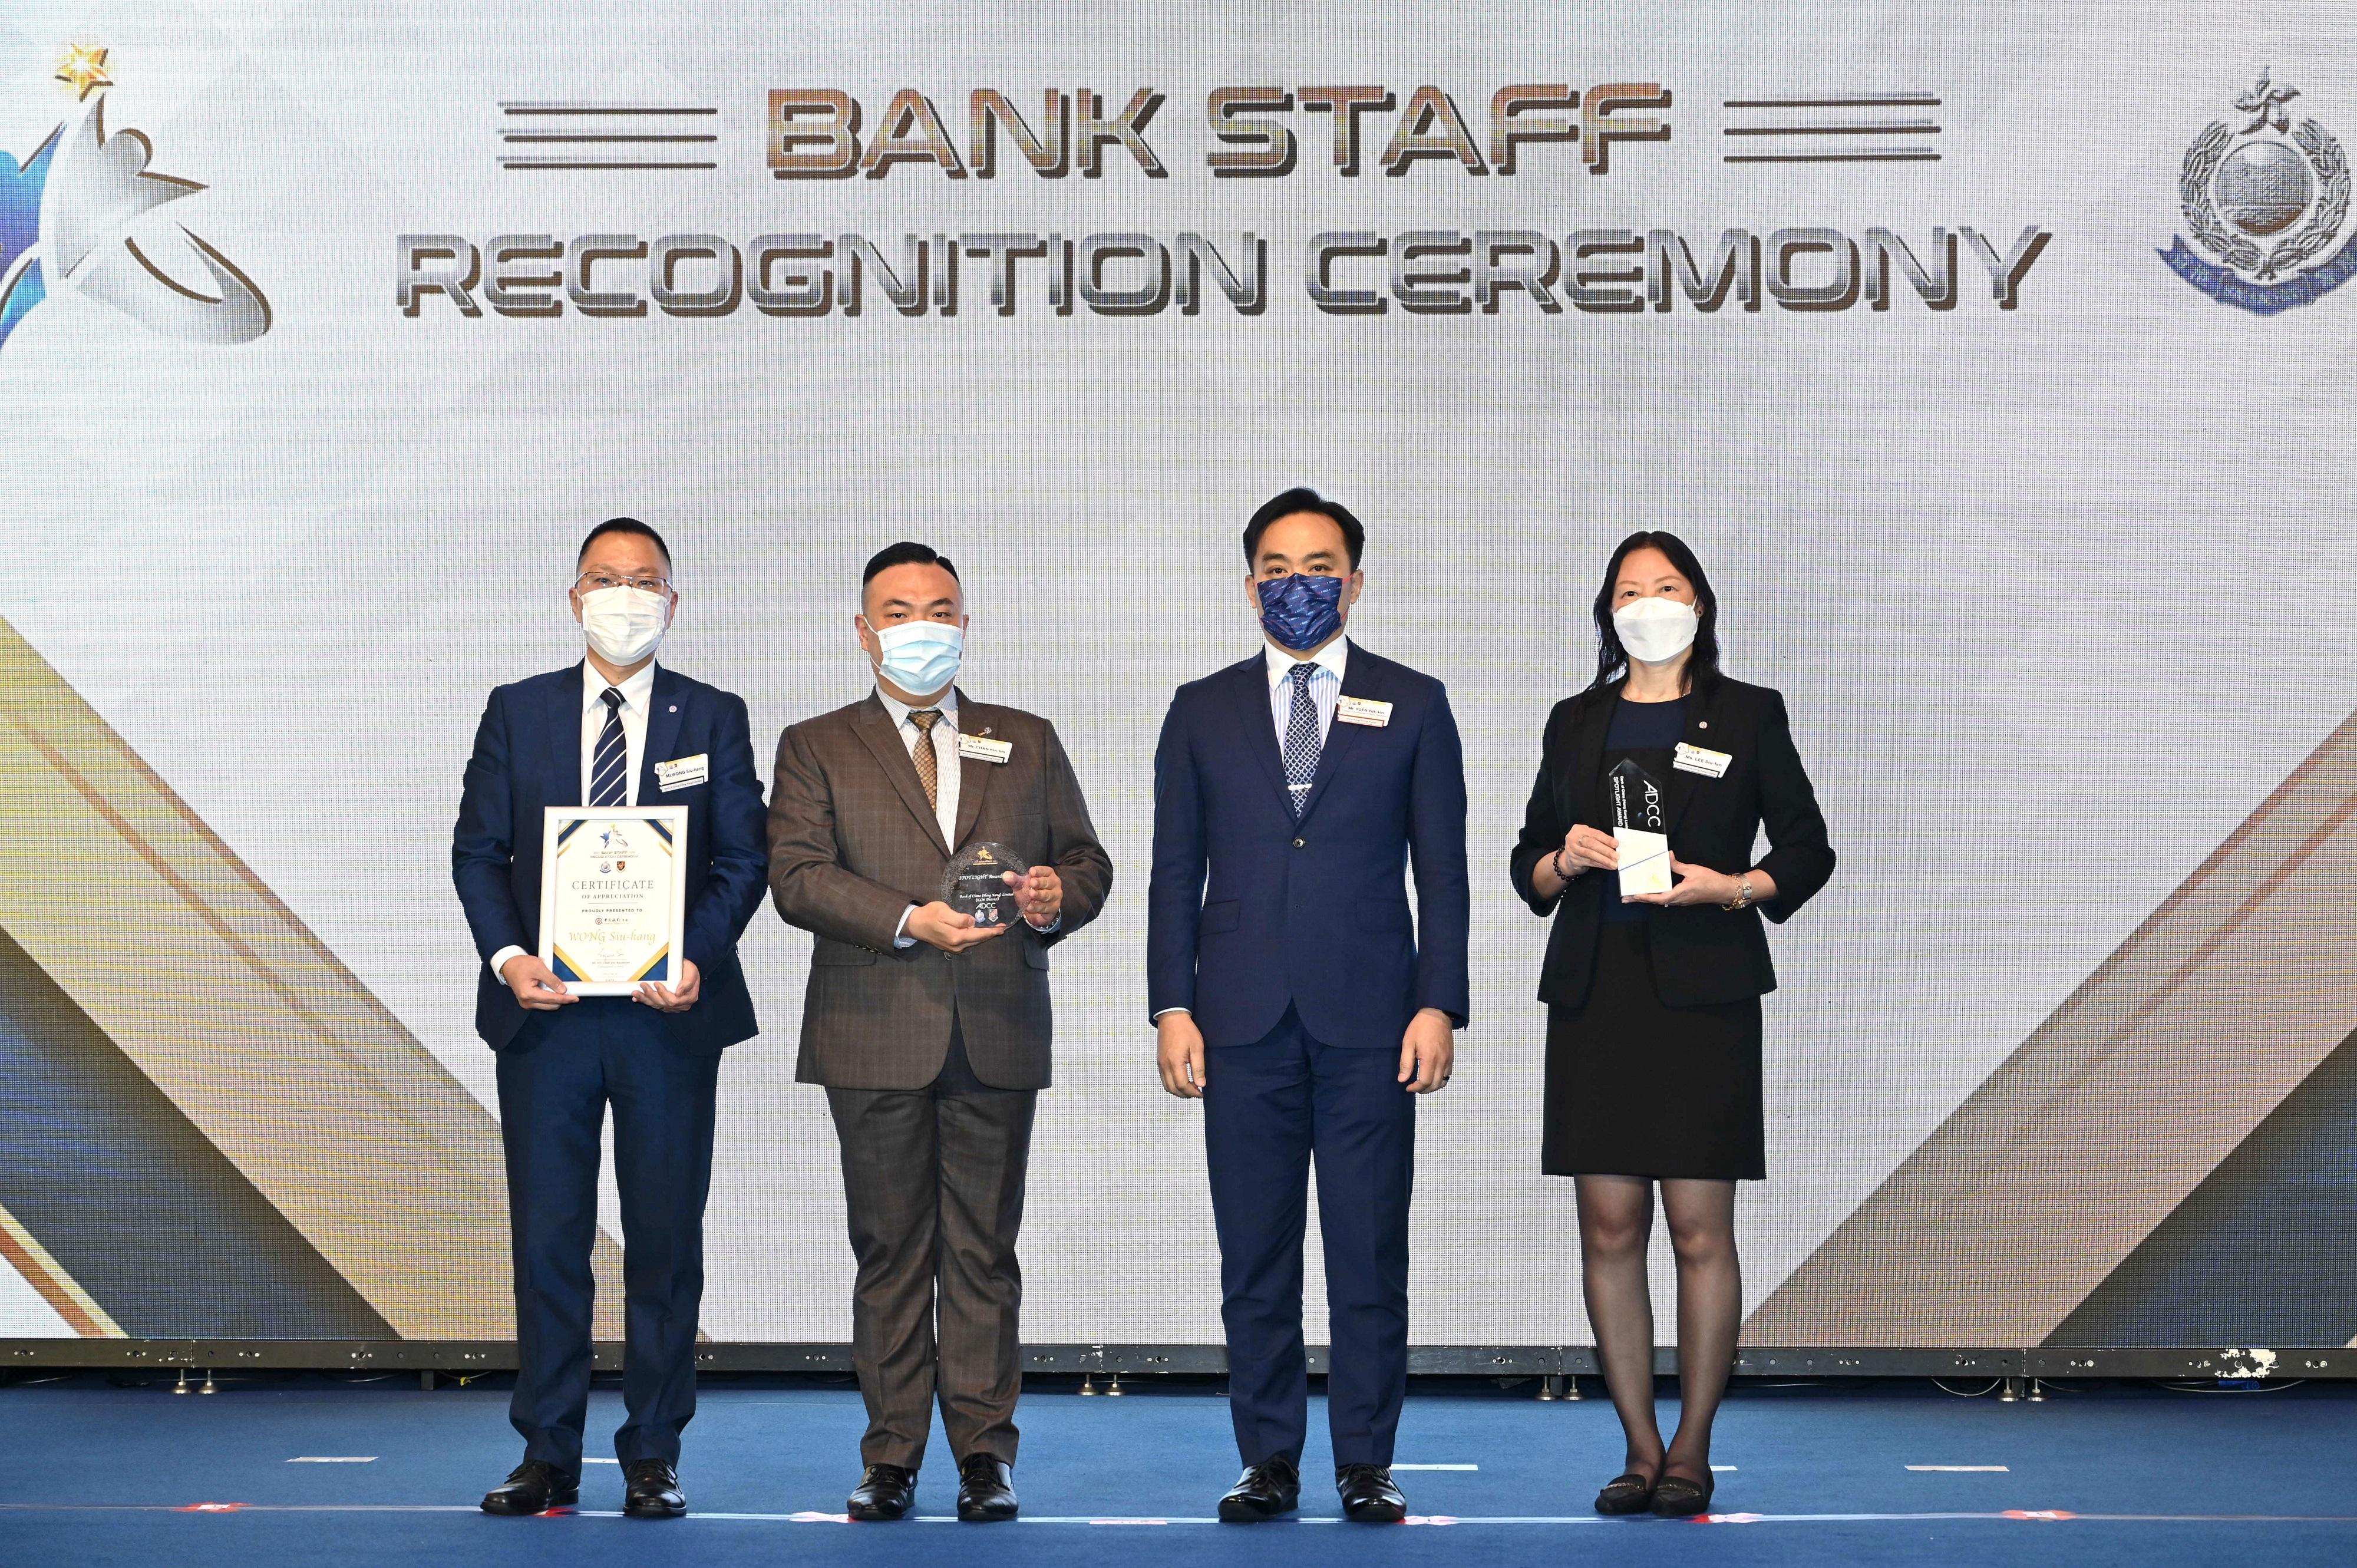 The Bank Staff Recognition Ceremony organised by the Hong Kong Police Force was held today (August 30). Photo shows the Deputy Commissioner of Police (Operations), Mr Yuen Yuk-kin (second right), presenting trophies and a certificate to frontline bank staff.